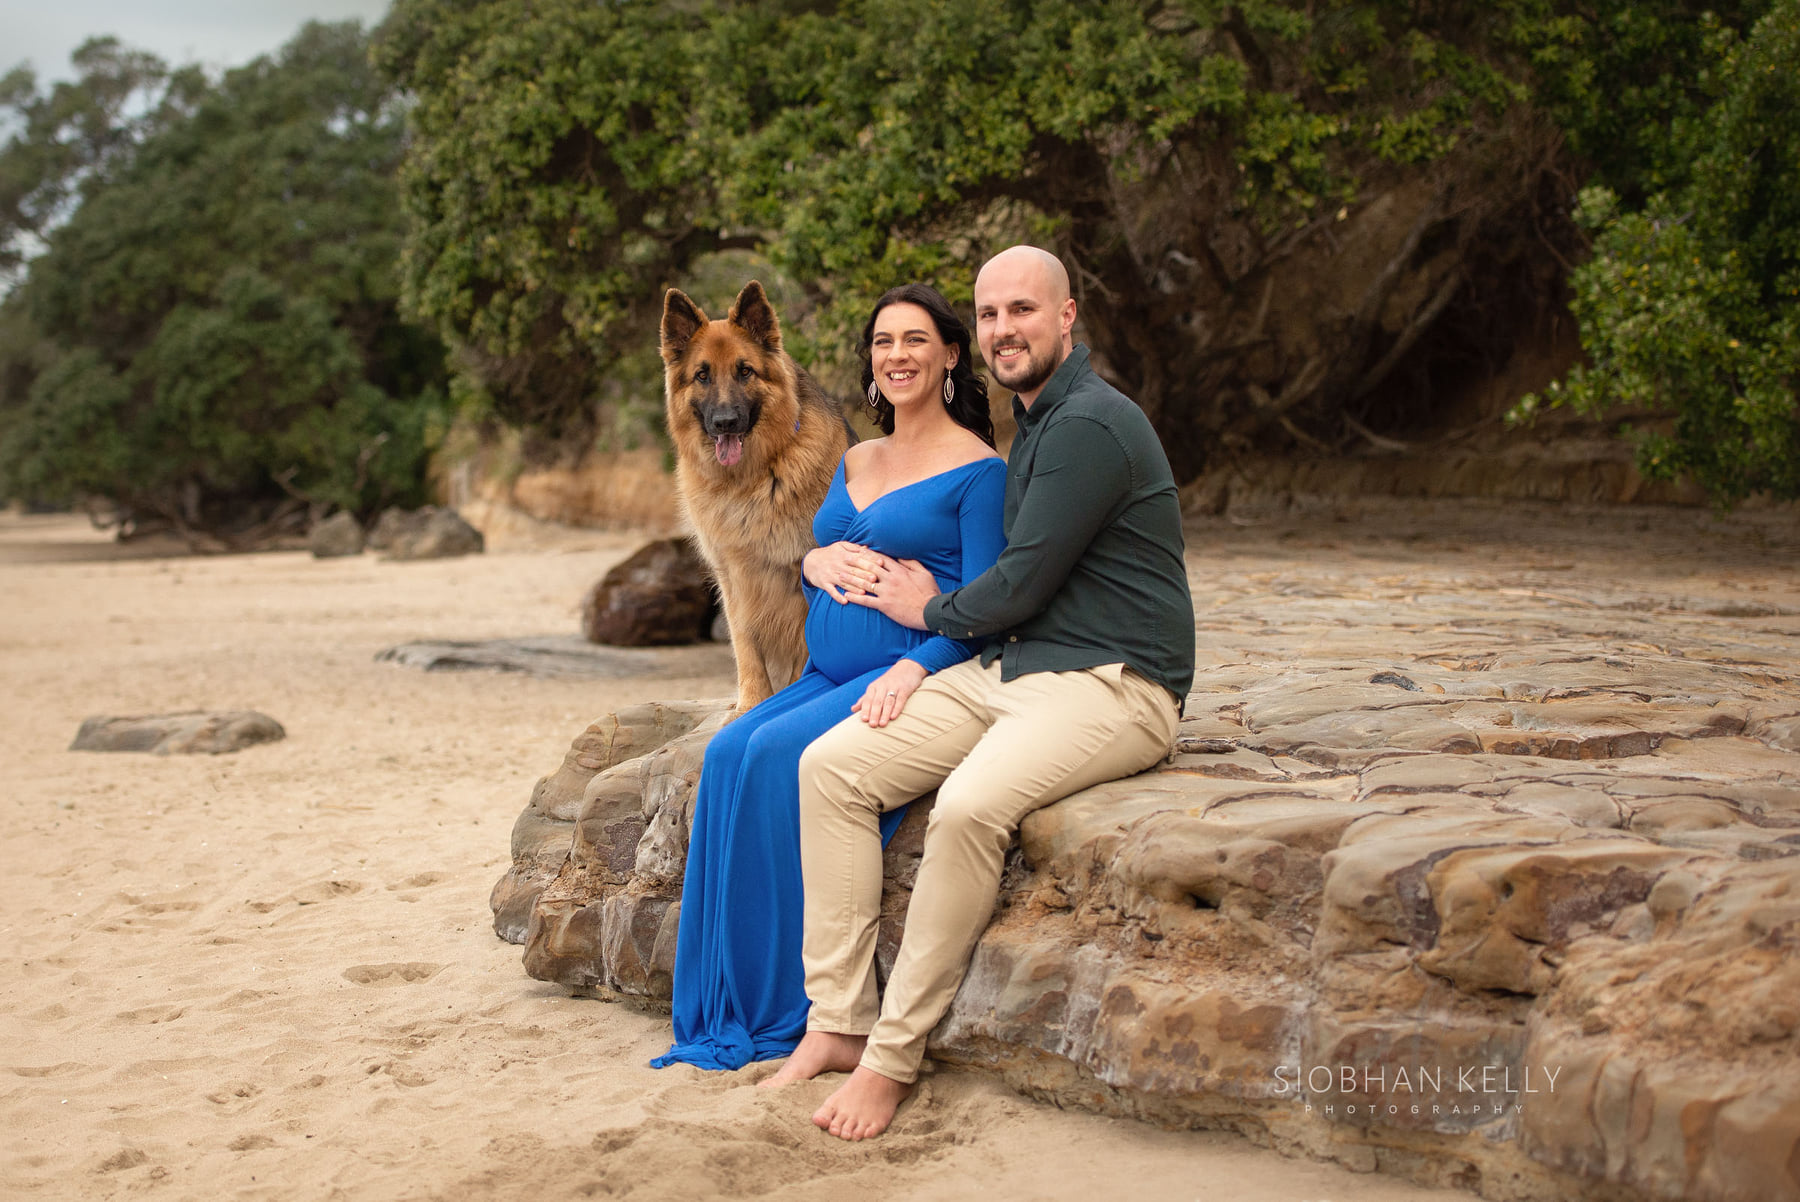 pregnancy photography with pet at beach by siobhan kelly photography